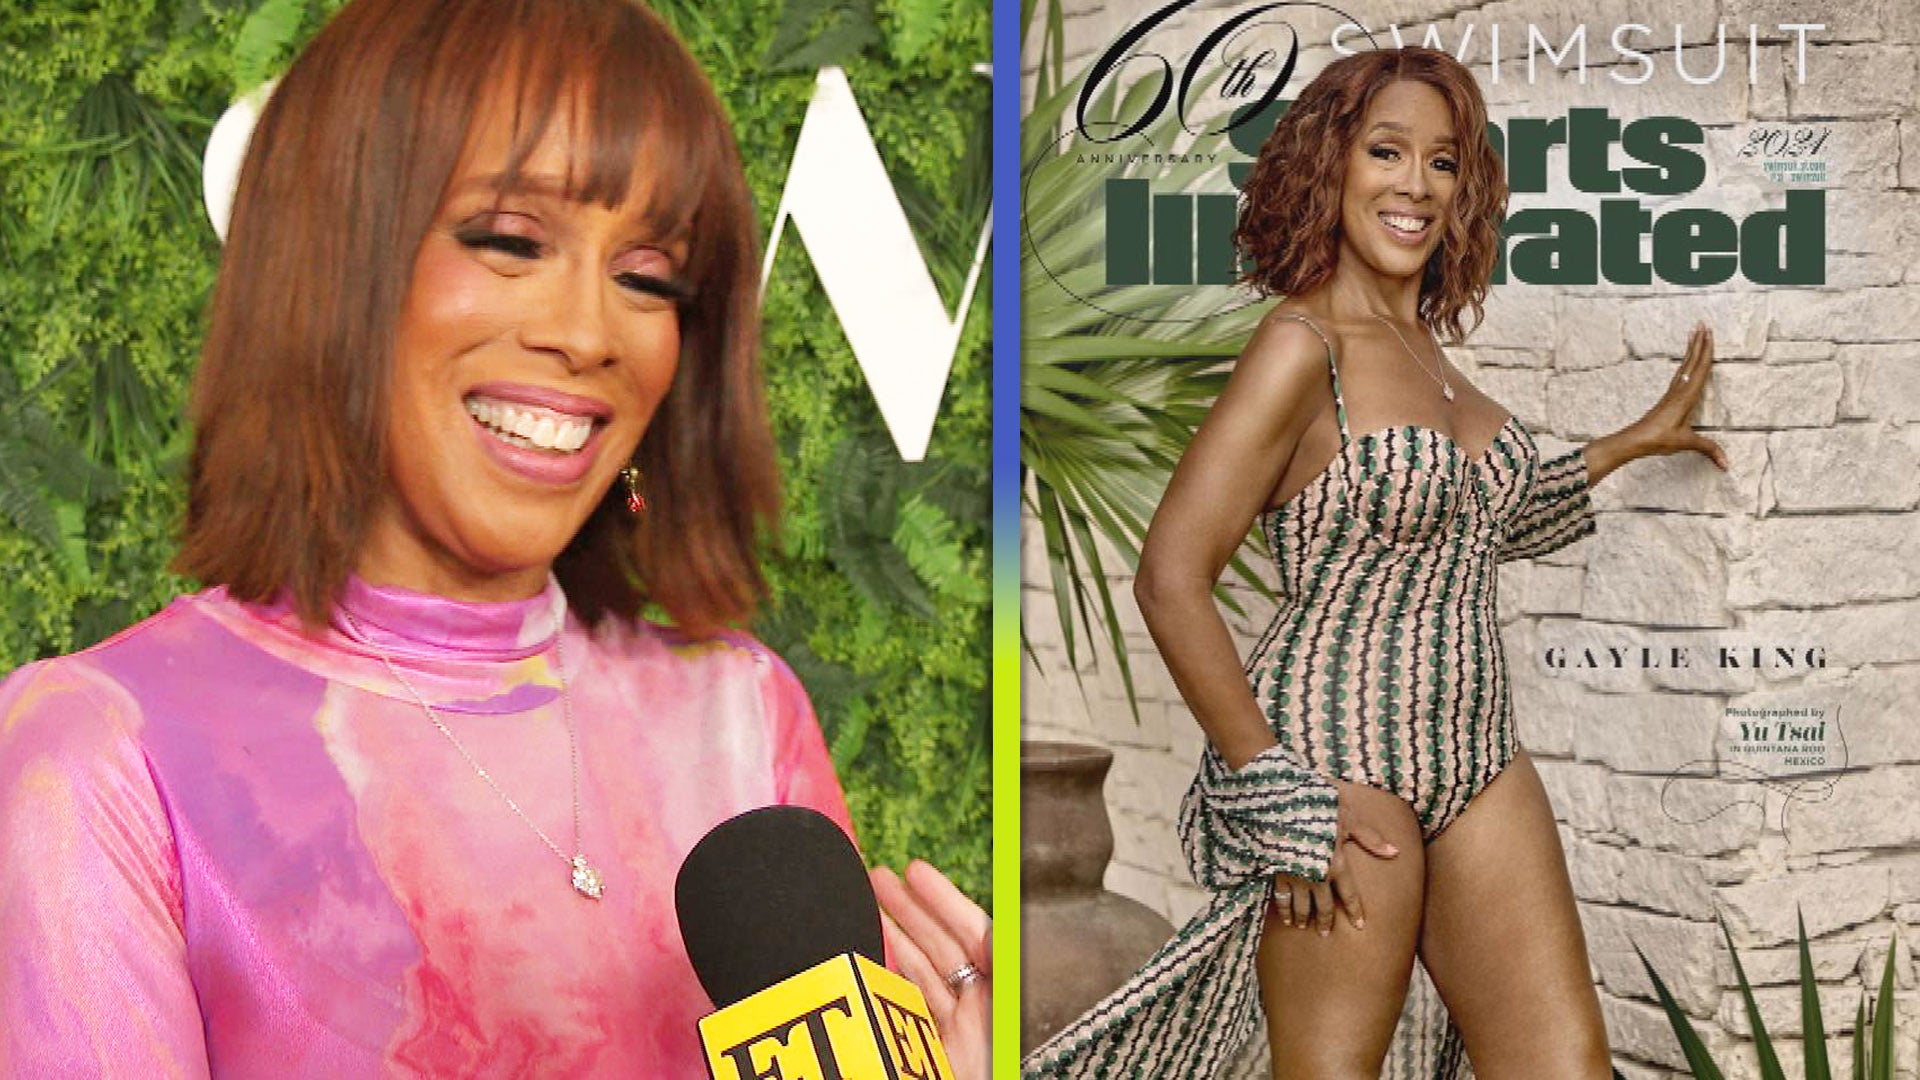 Gayle King Pokes Fun at Her Ex-Husband as She Celebrates 'Sports Illustrated' Cover (Exclusive)